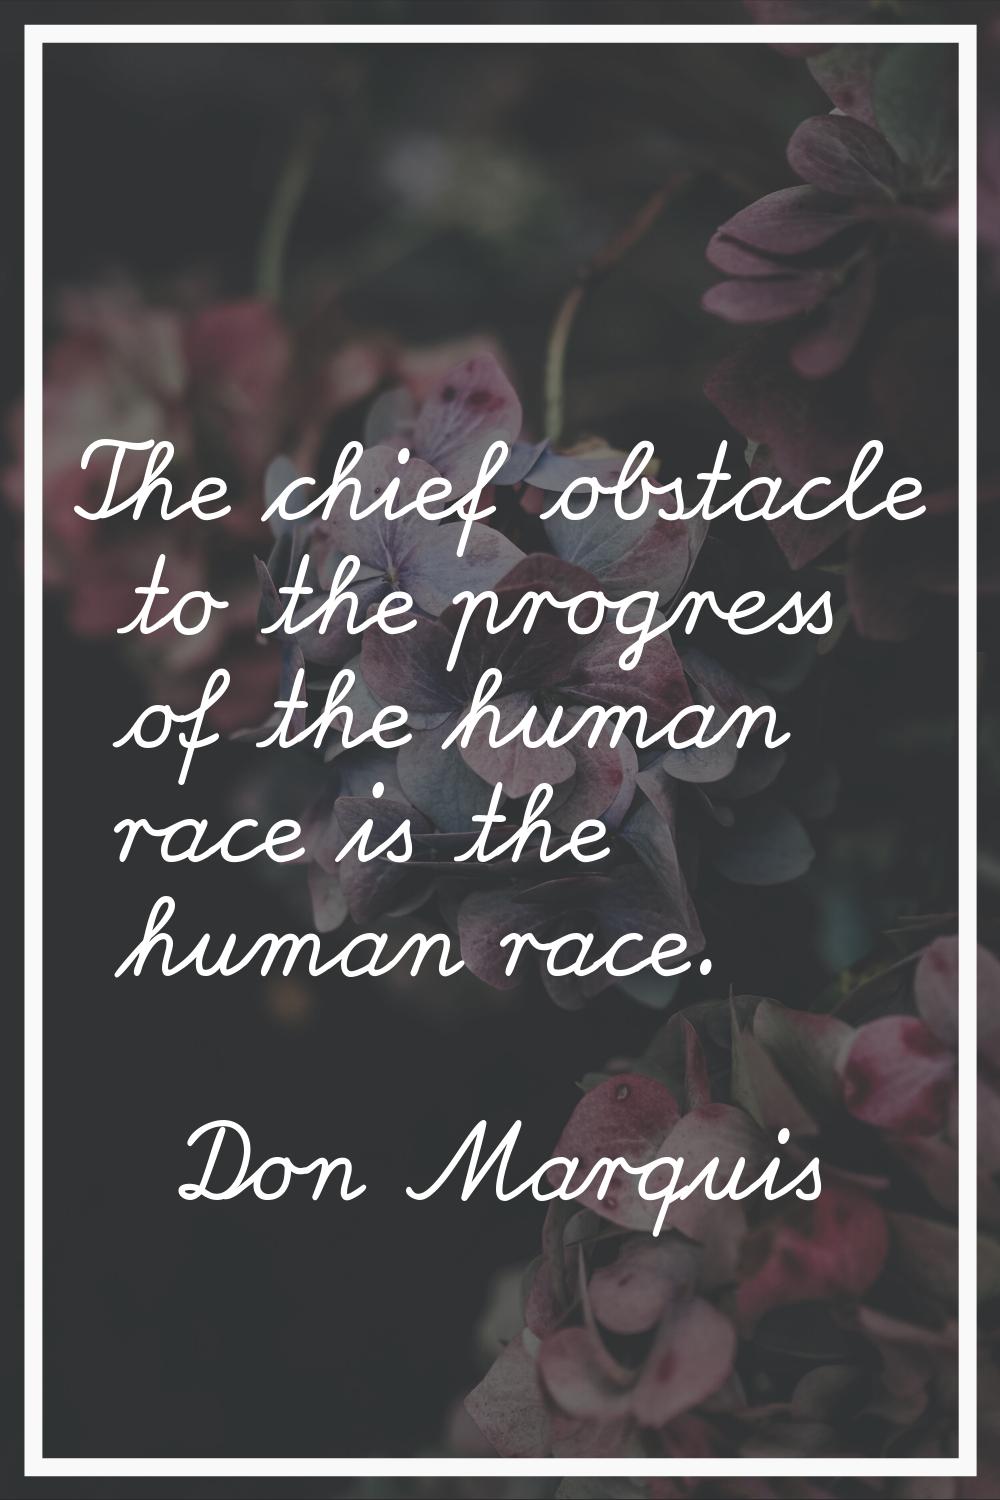 The chief obstacle to the progress of the human race is the human race.